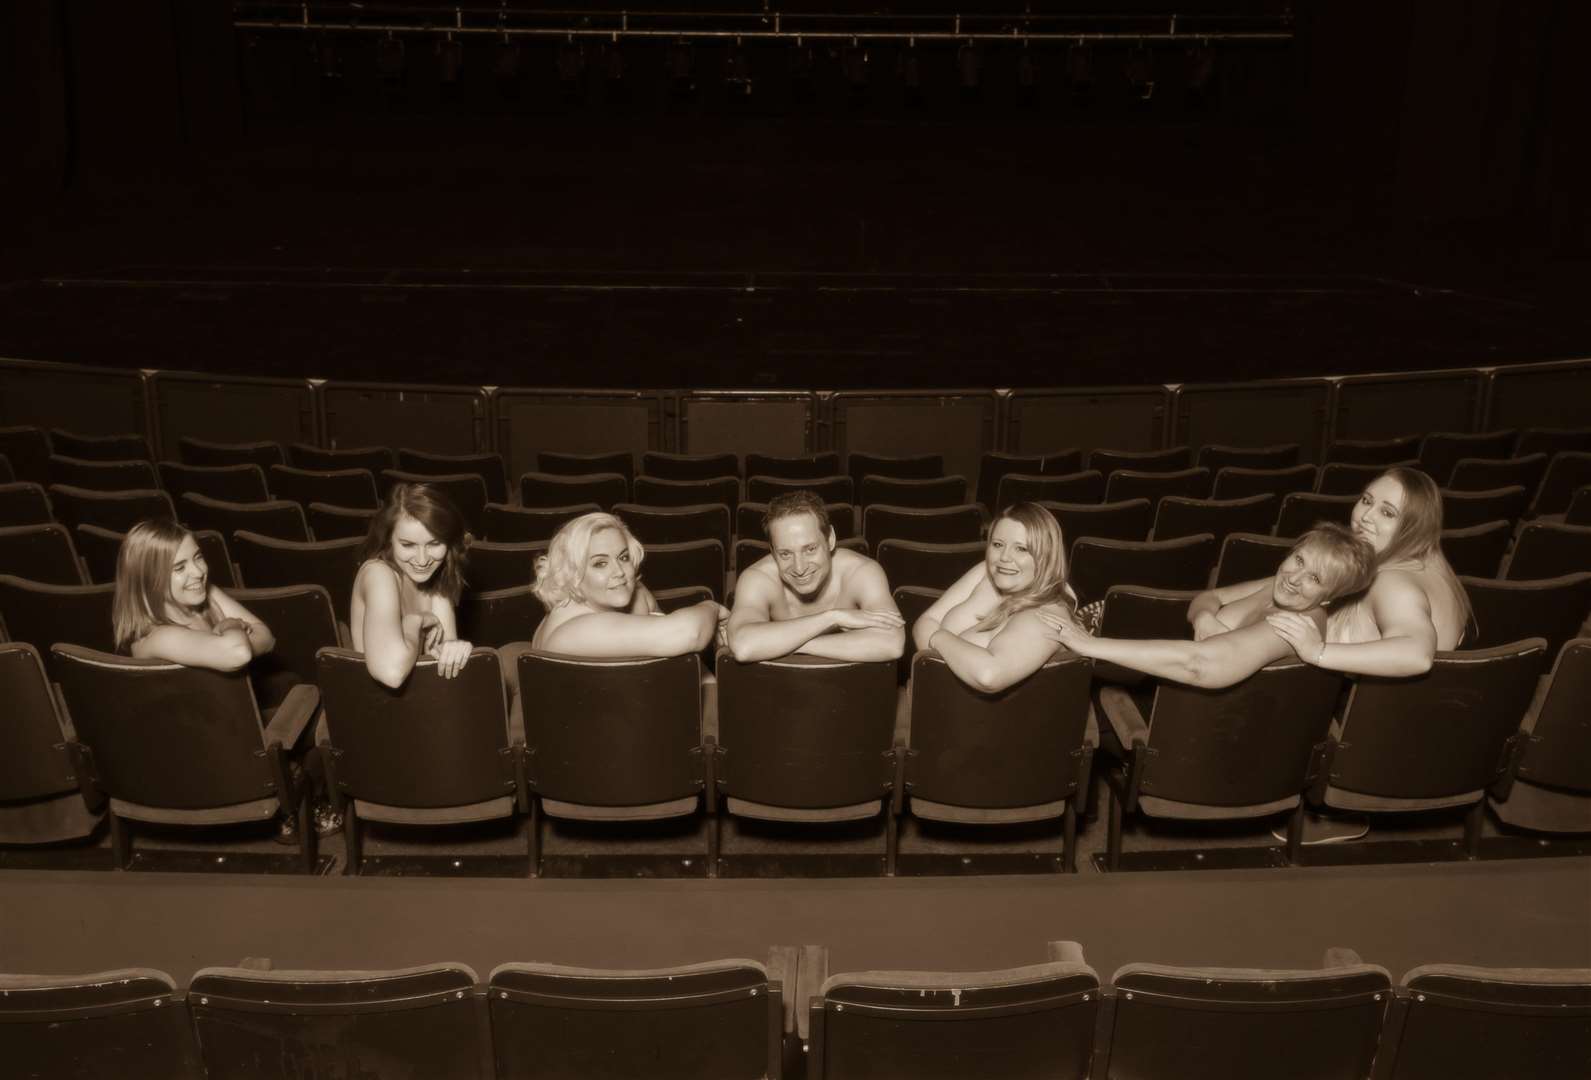 Staff who work at the theatre star in the calendar (5847678)